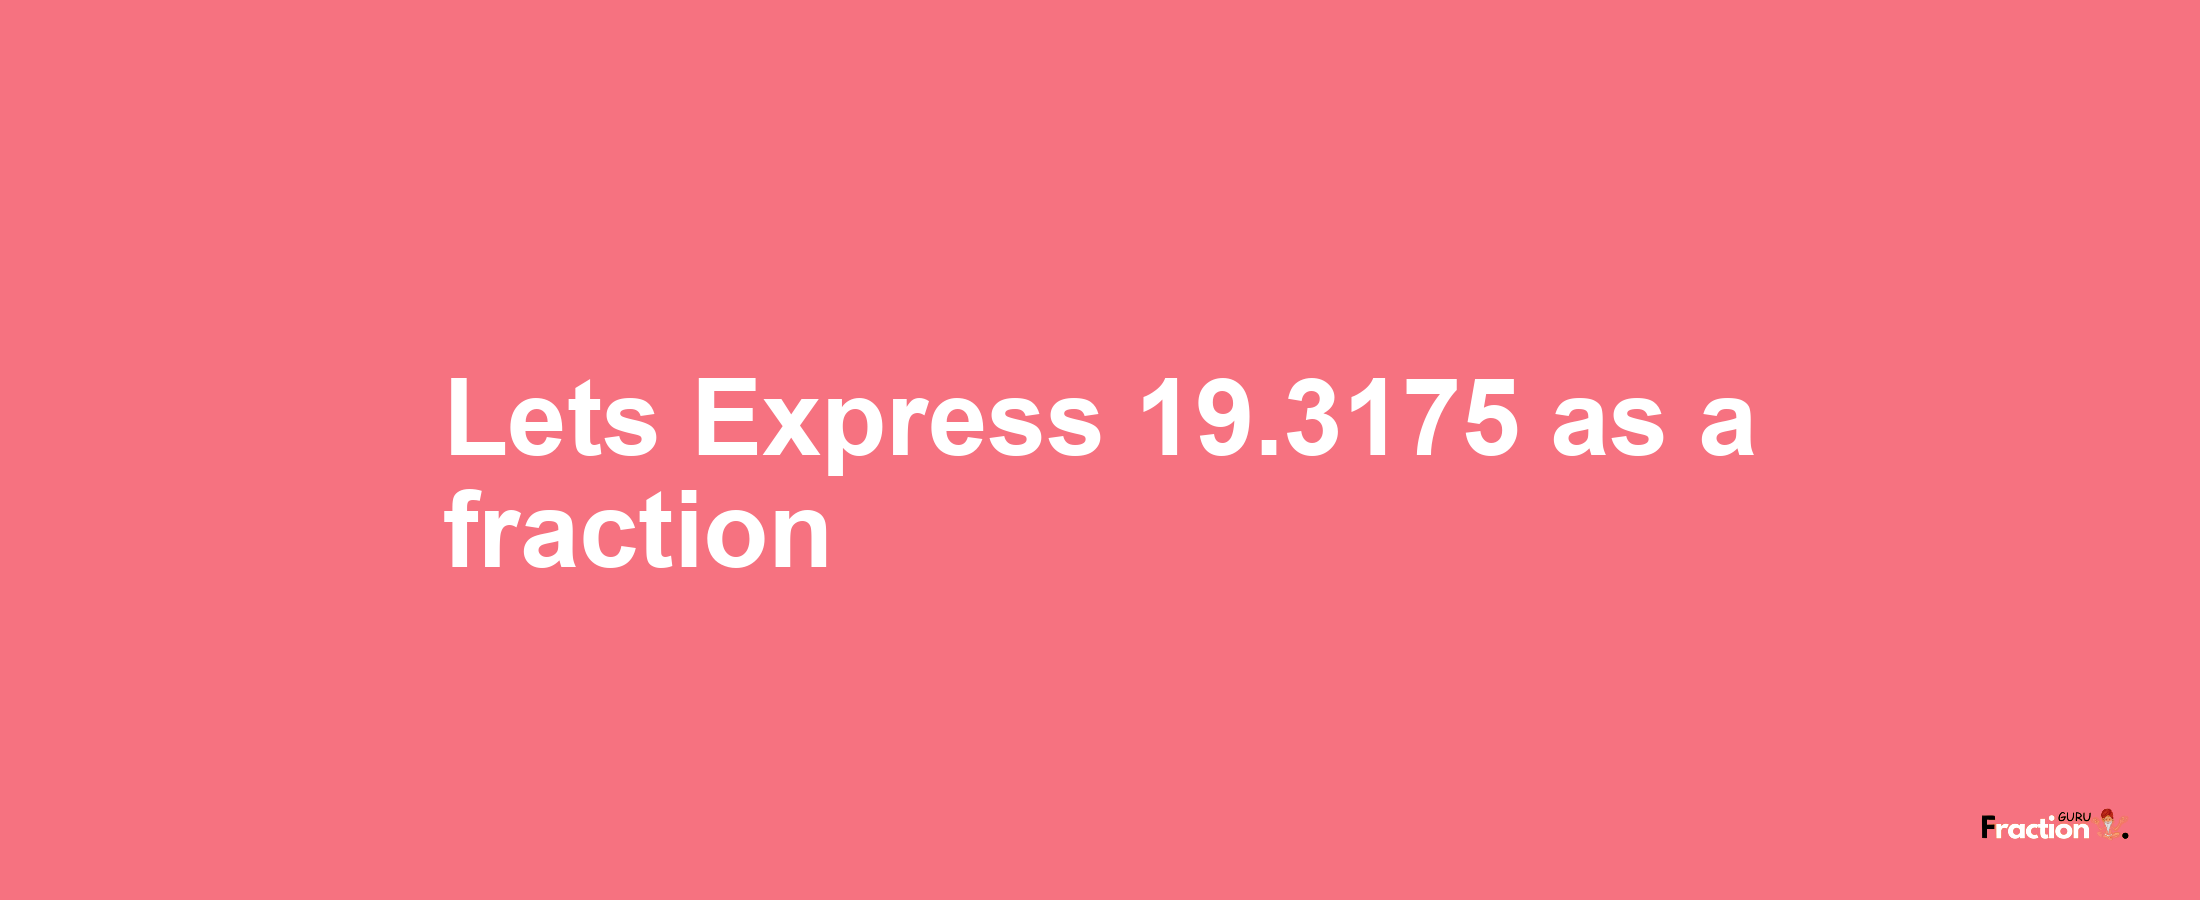 Lets Express 19.3175 as afraction